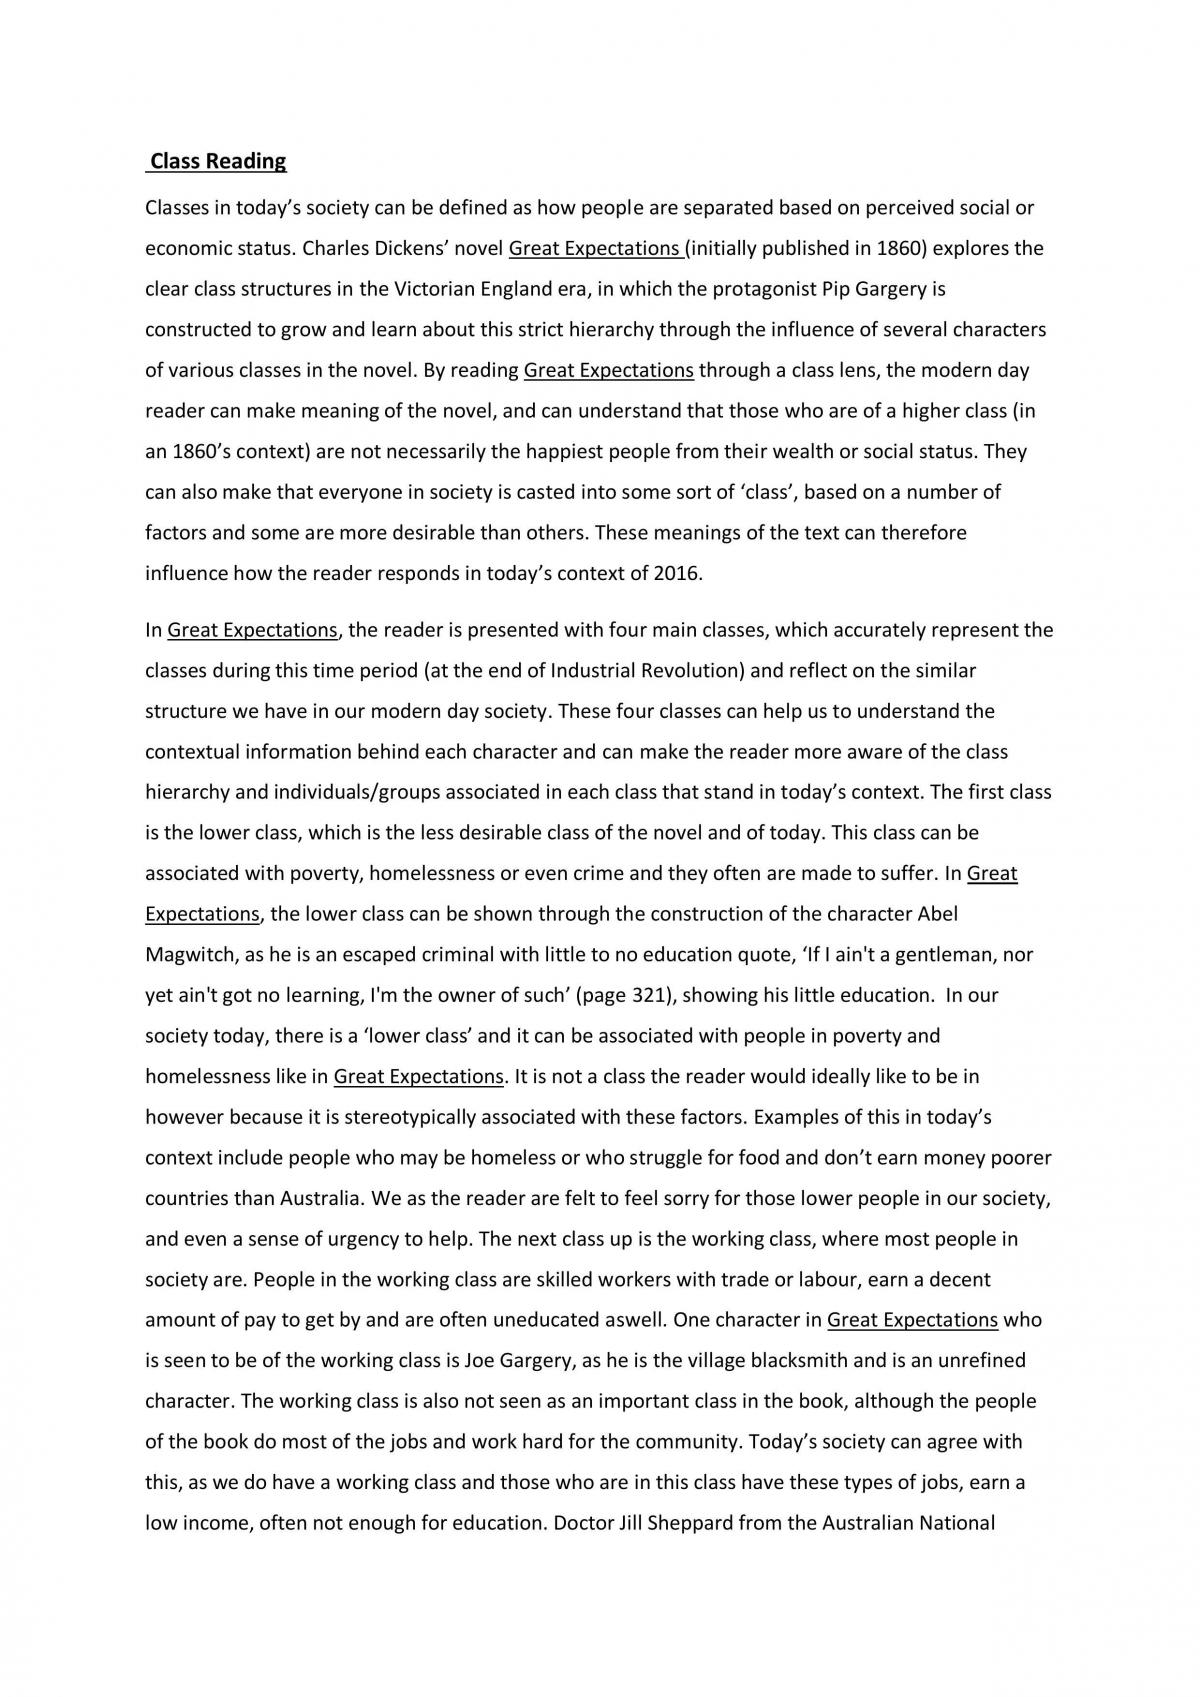 great expectations book review essay